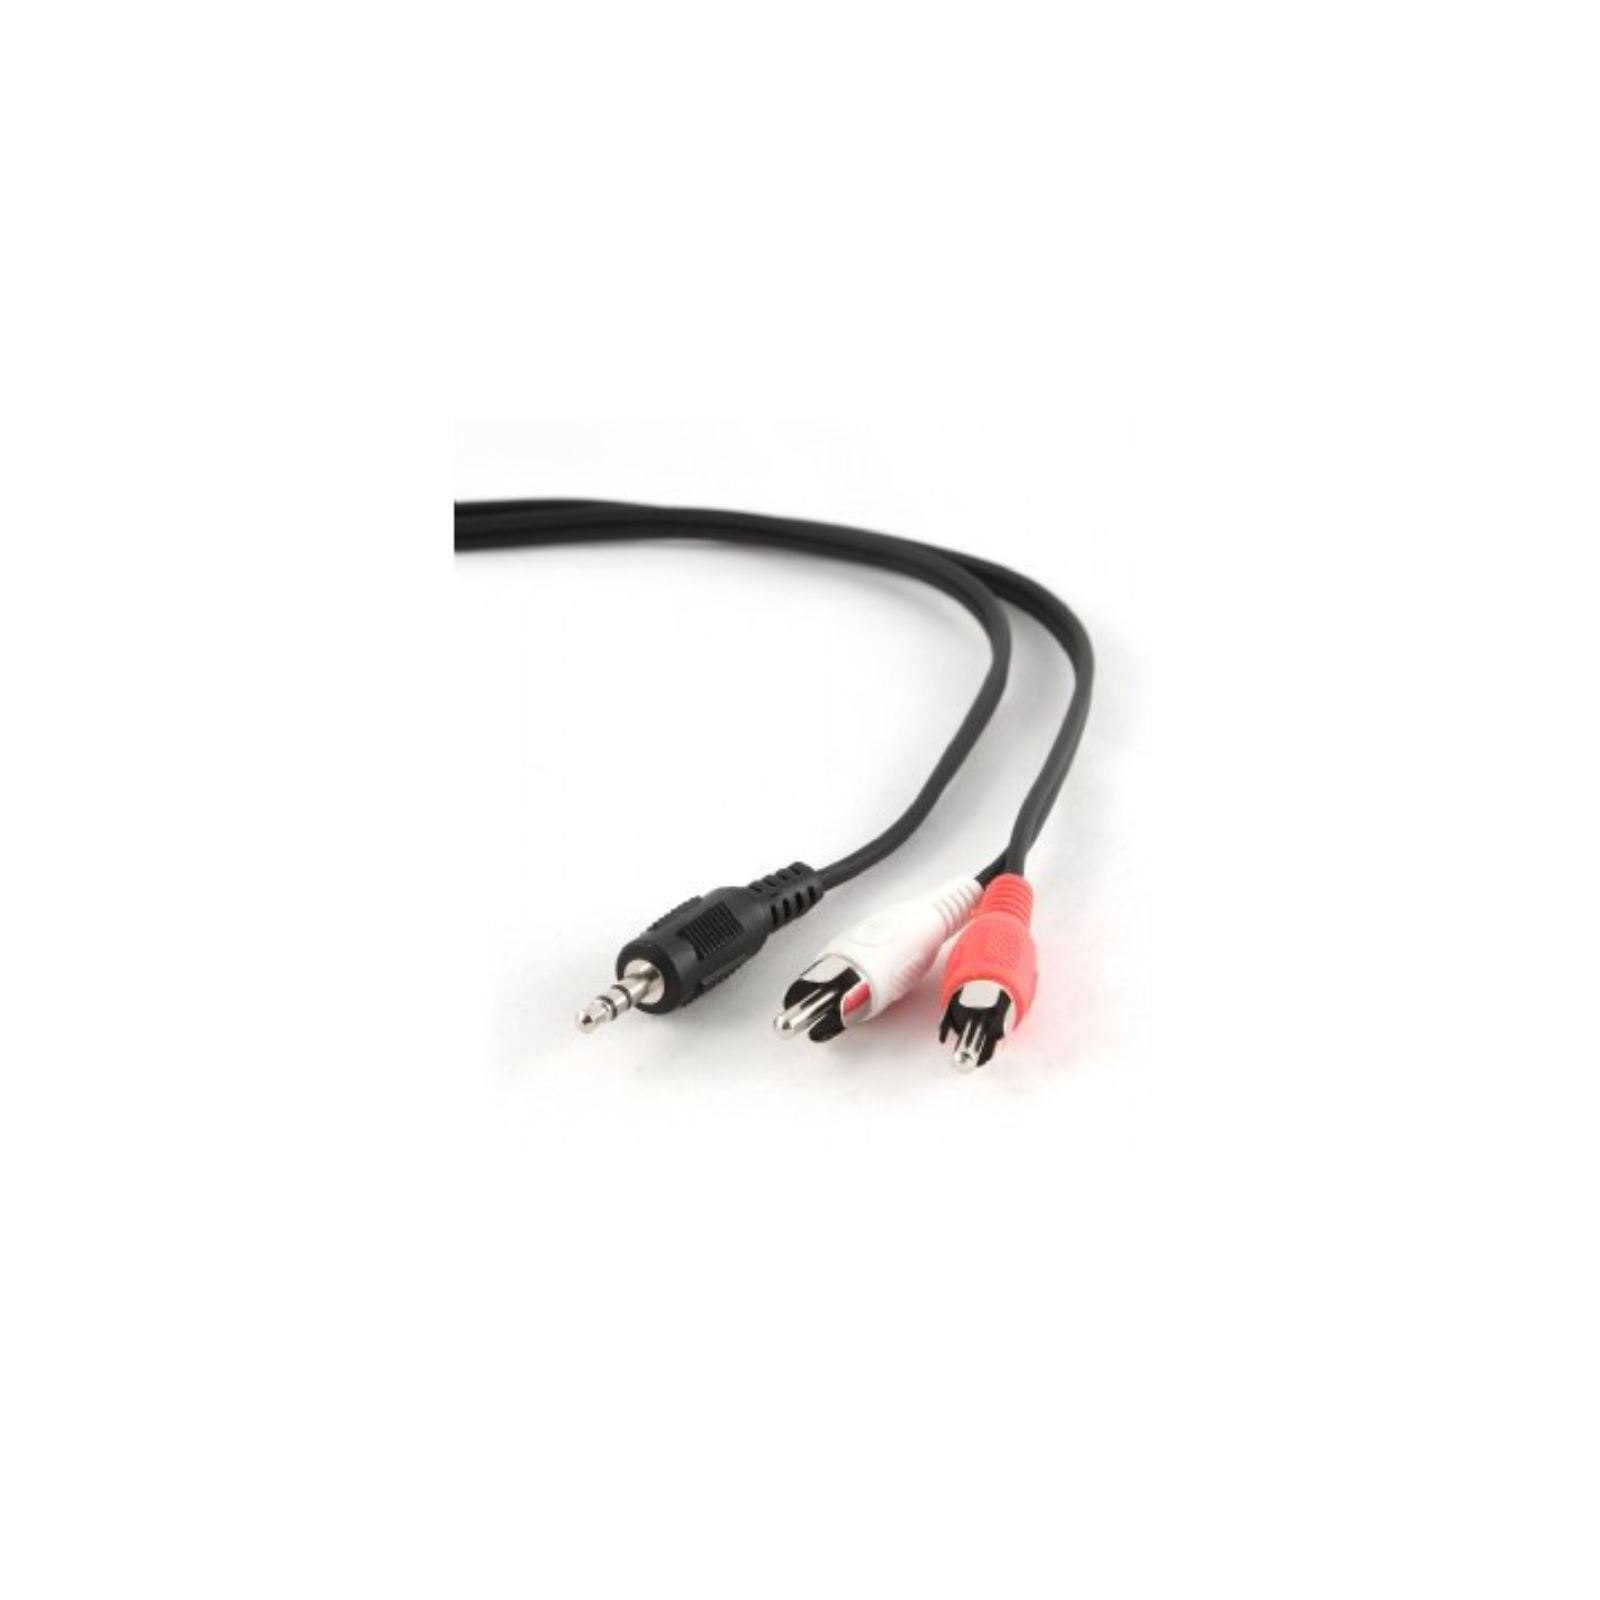 CABLE AUDIO GEMBIRD CONECTOR 35MM A RCA 25M